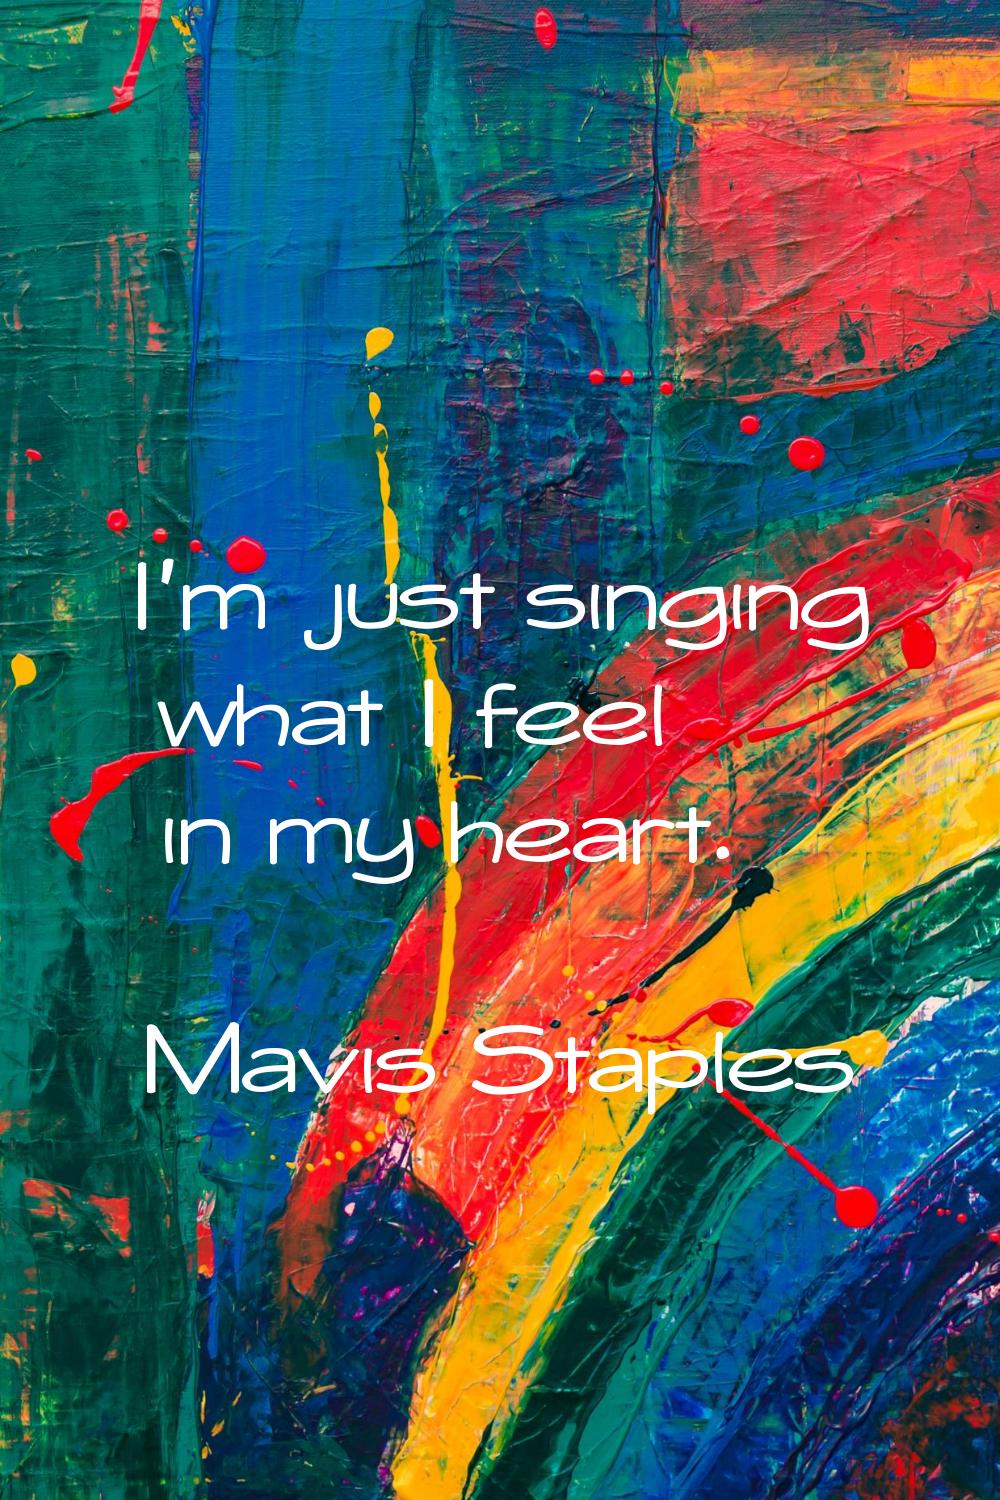 I'm just singing what I feel in my heart.